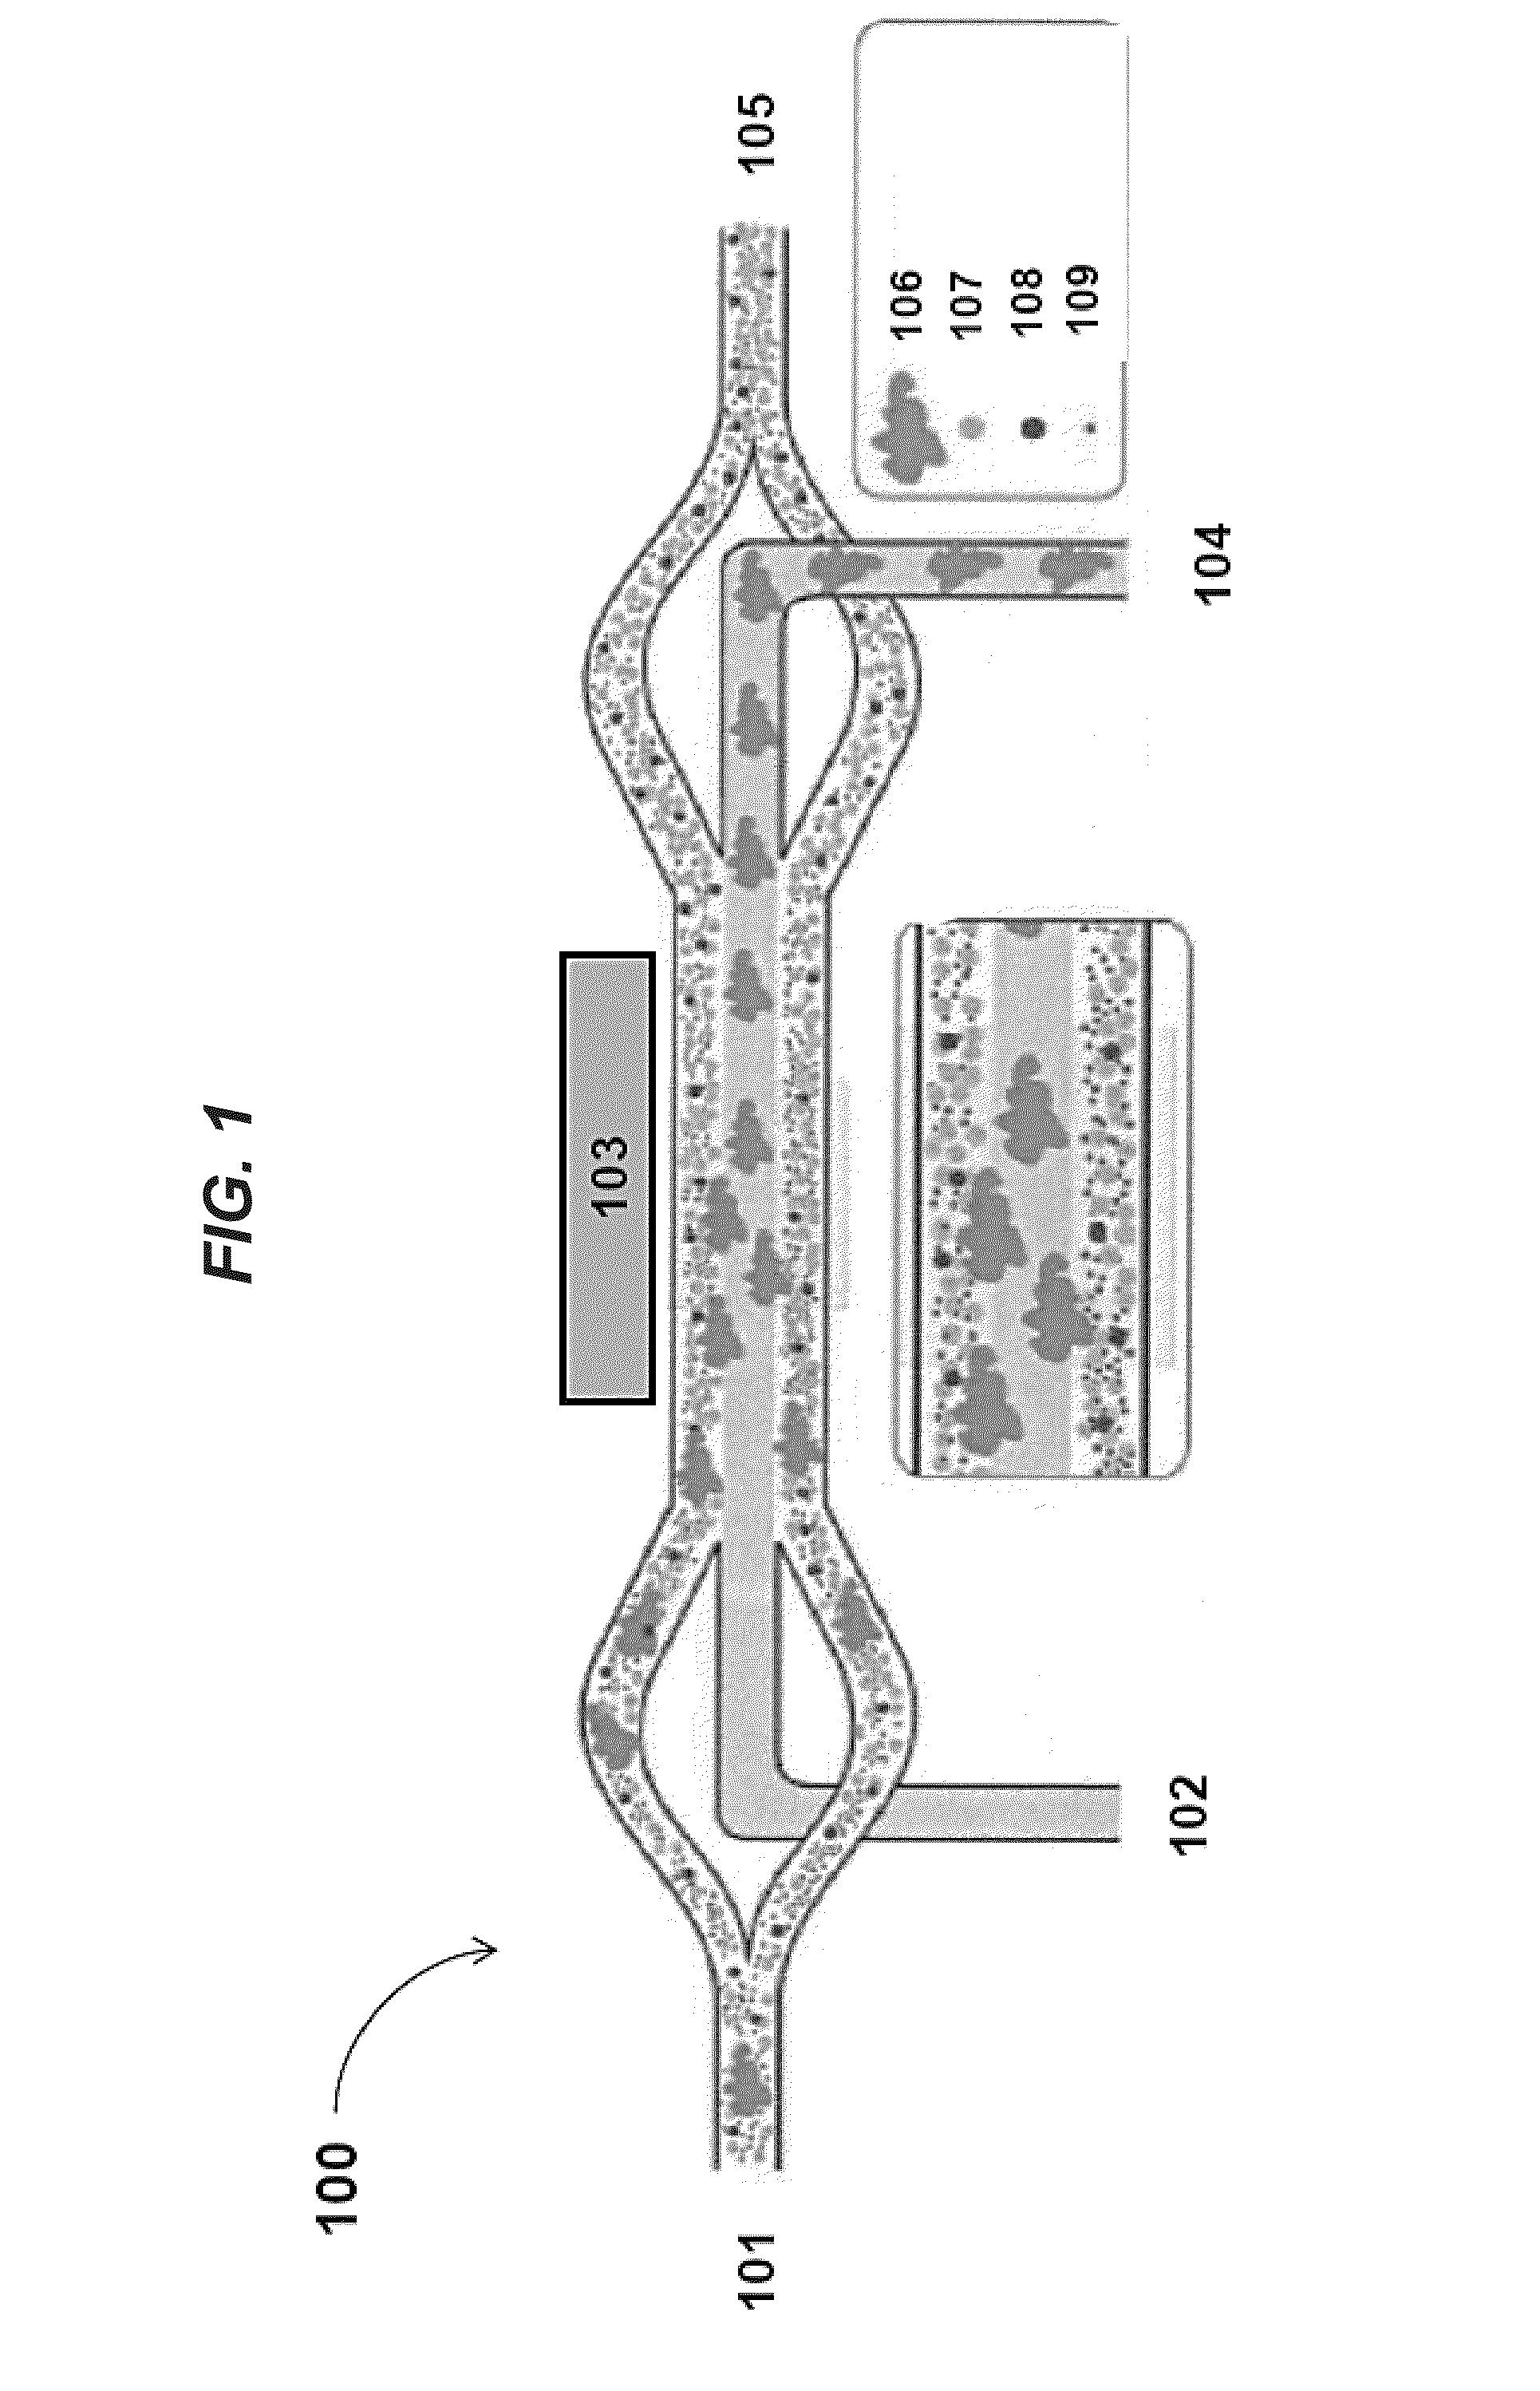 Devices and methods for processing a biological sample